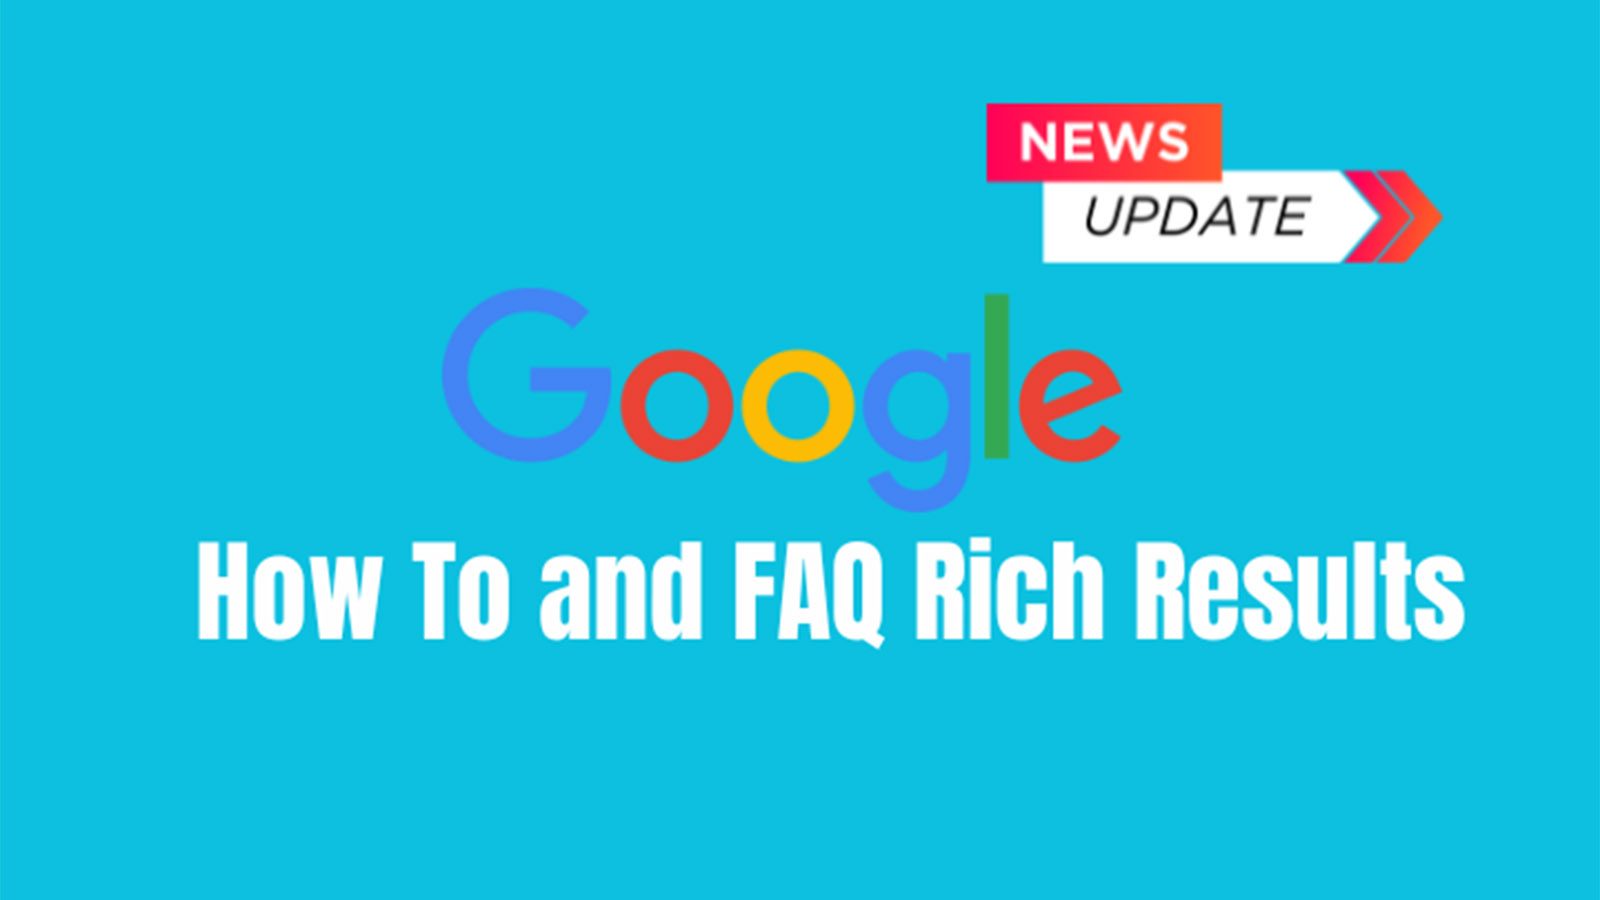 Google Announces Changes To How To And FAQ Rich Results